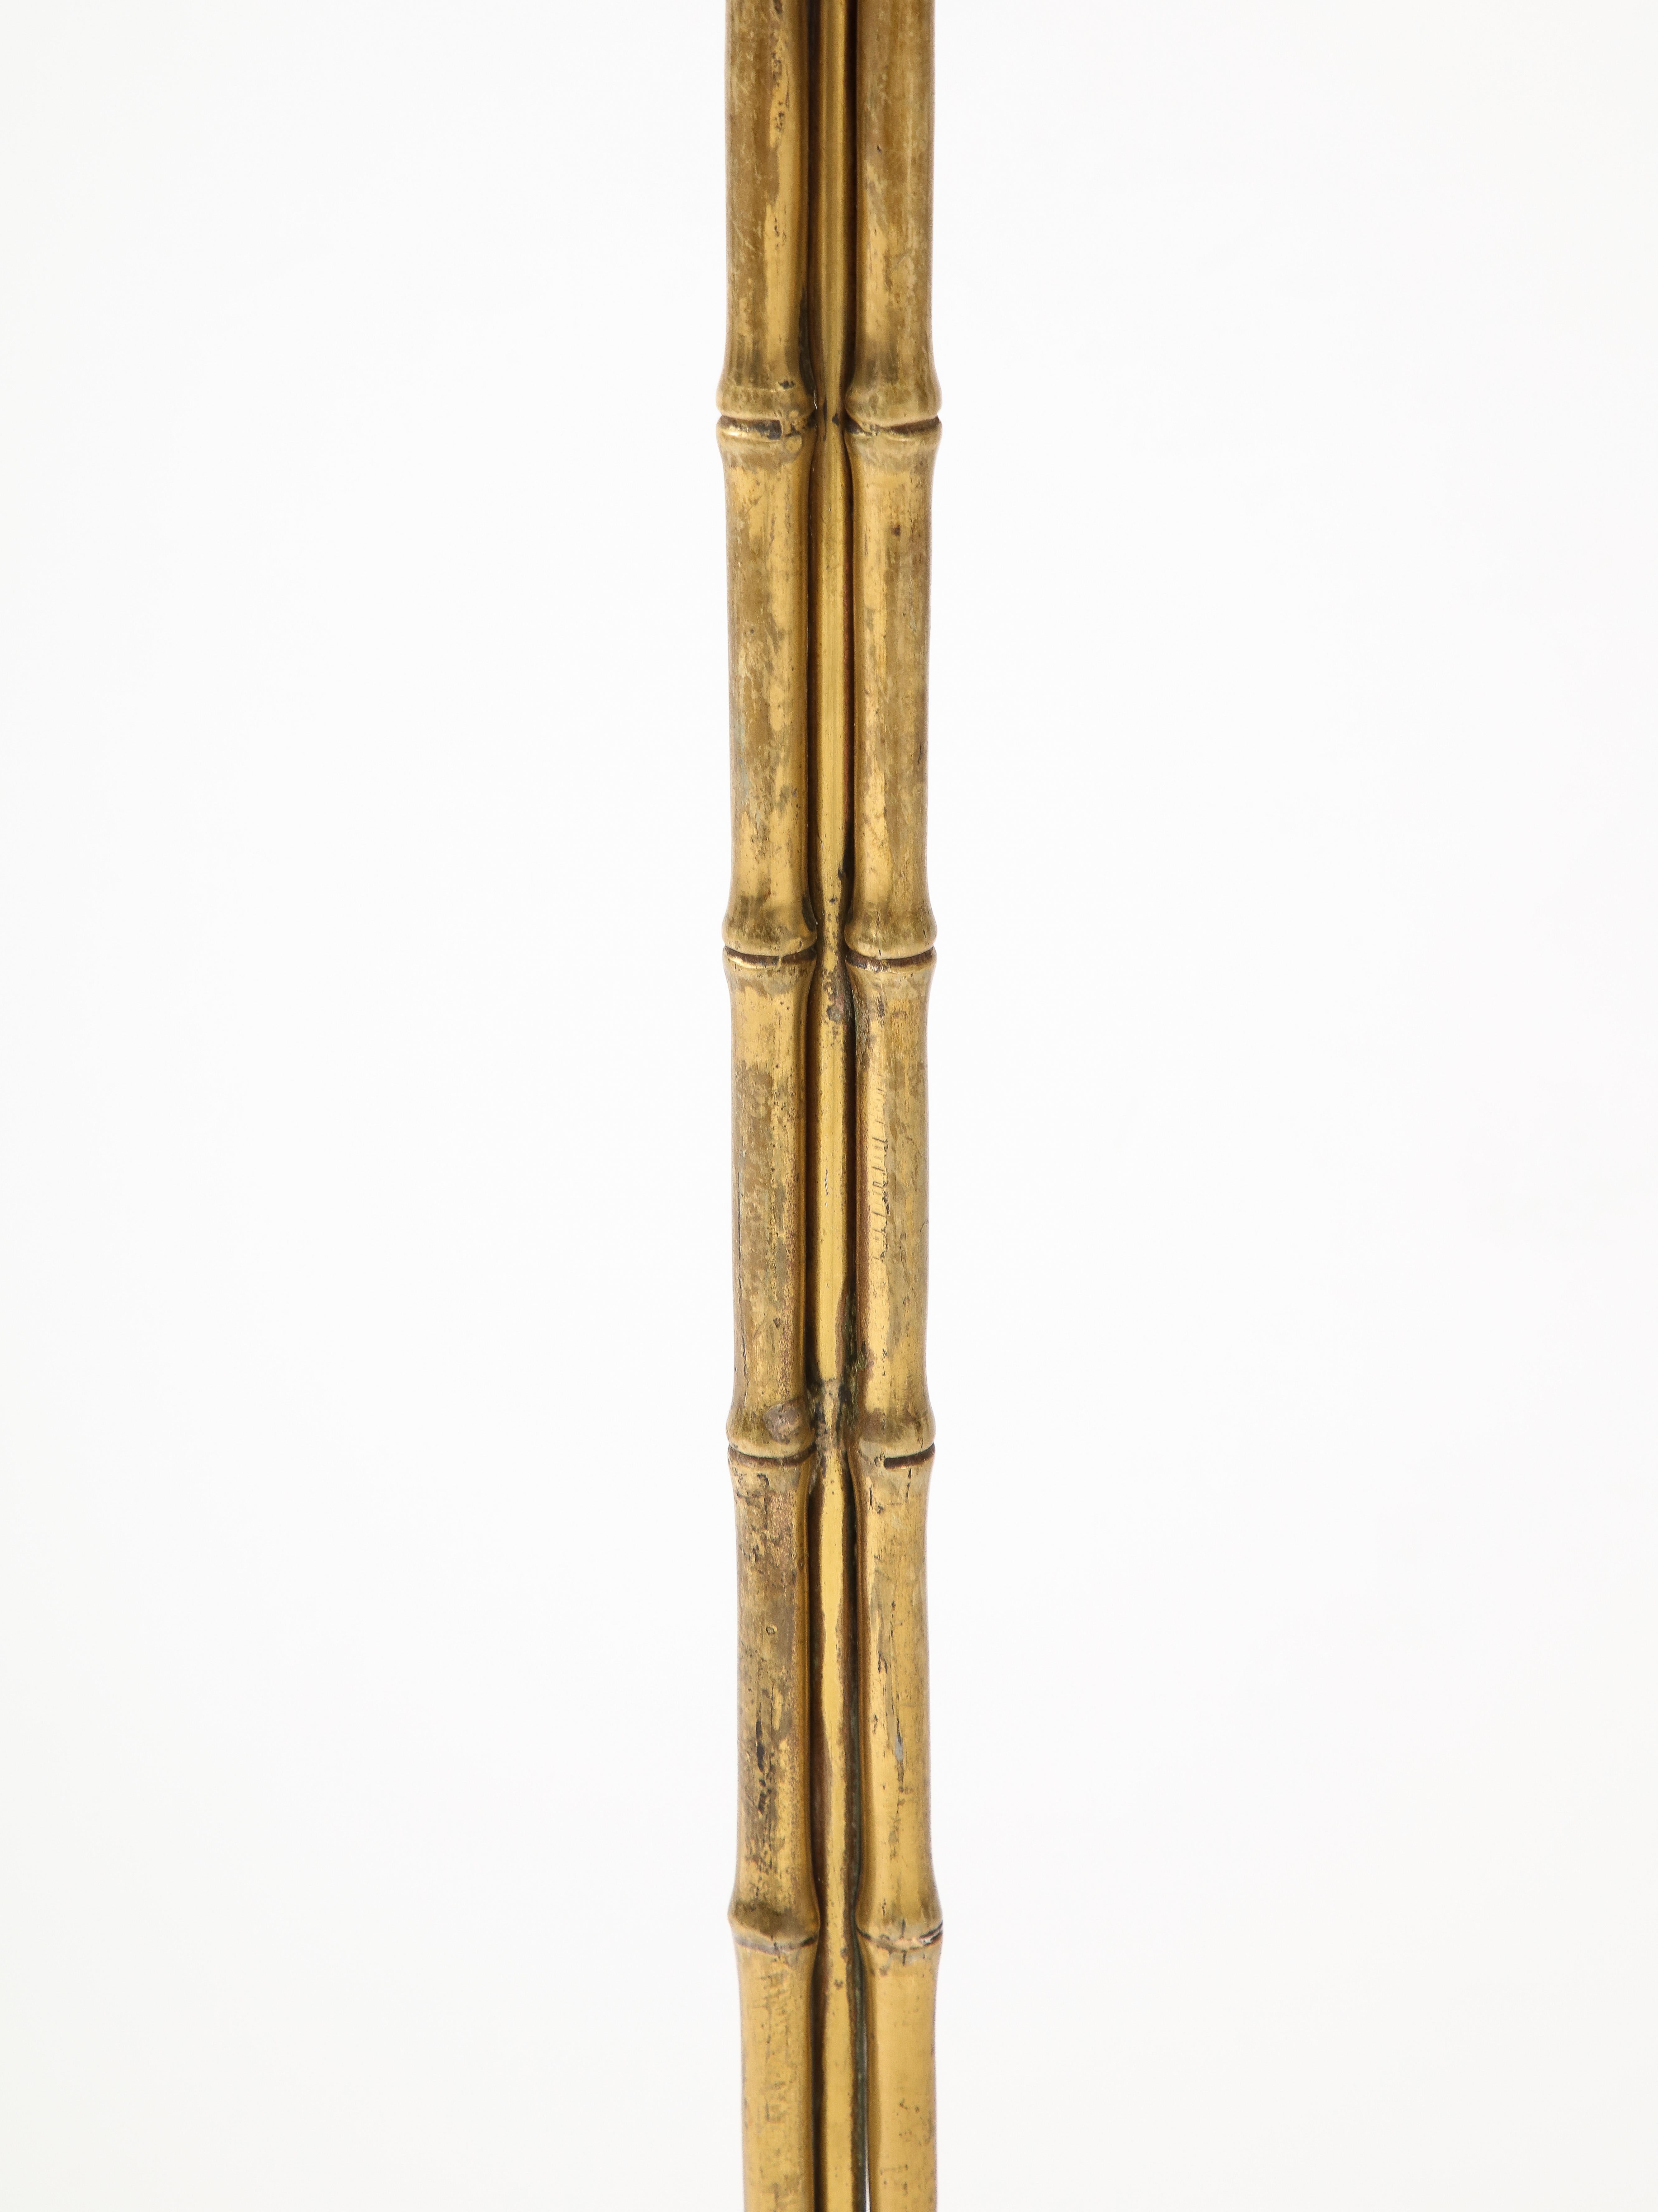 Italian Maison Bagués Style Faux Bamboo Solid Brass Tripod Floor Lamp For Sale